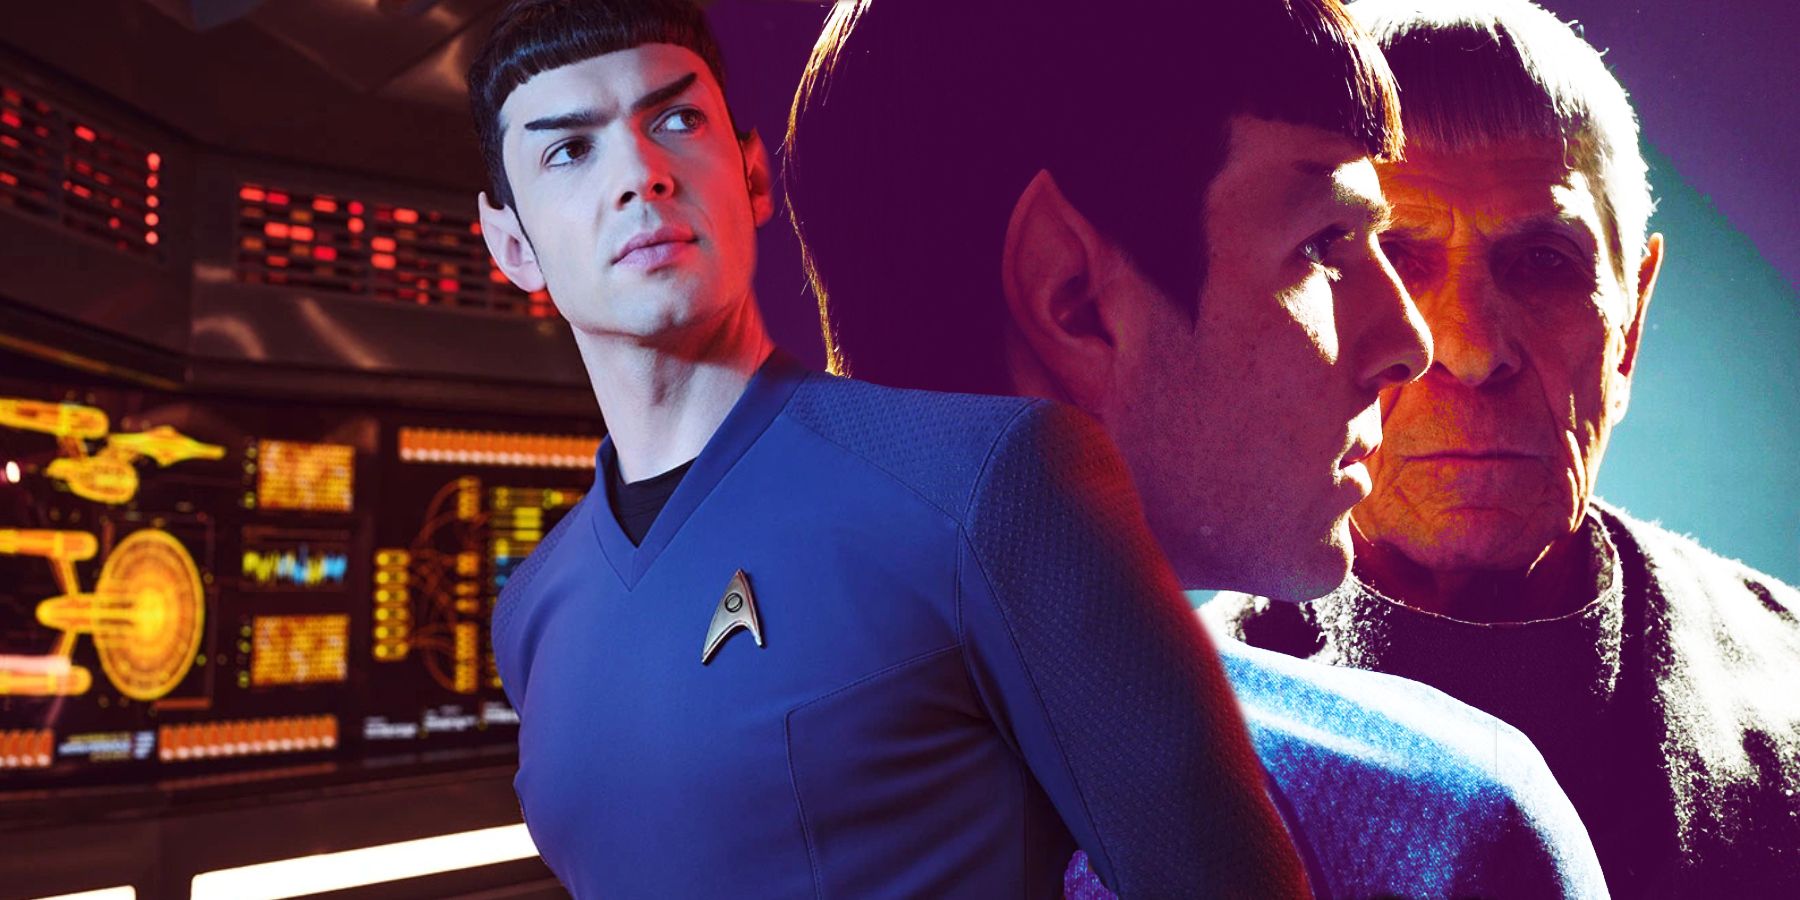 Ethan Peck, Zachary Quinto and Leonard Nimoy as Spock